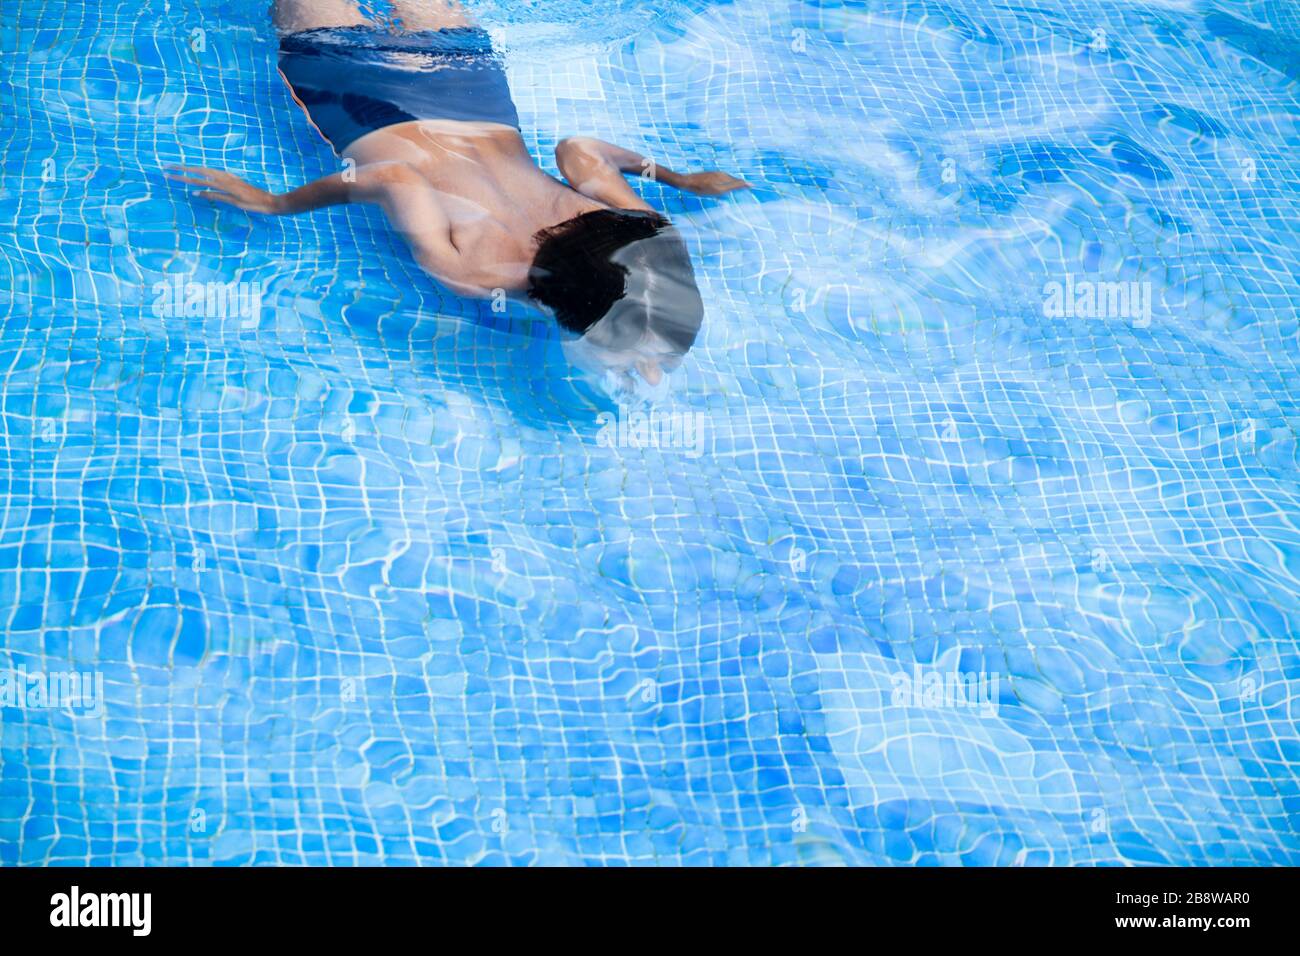 High angle view of boy diving in outdoor swimming pool. Stock Photo